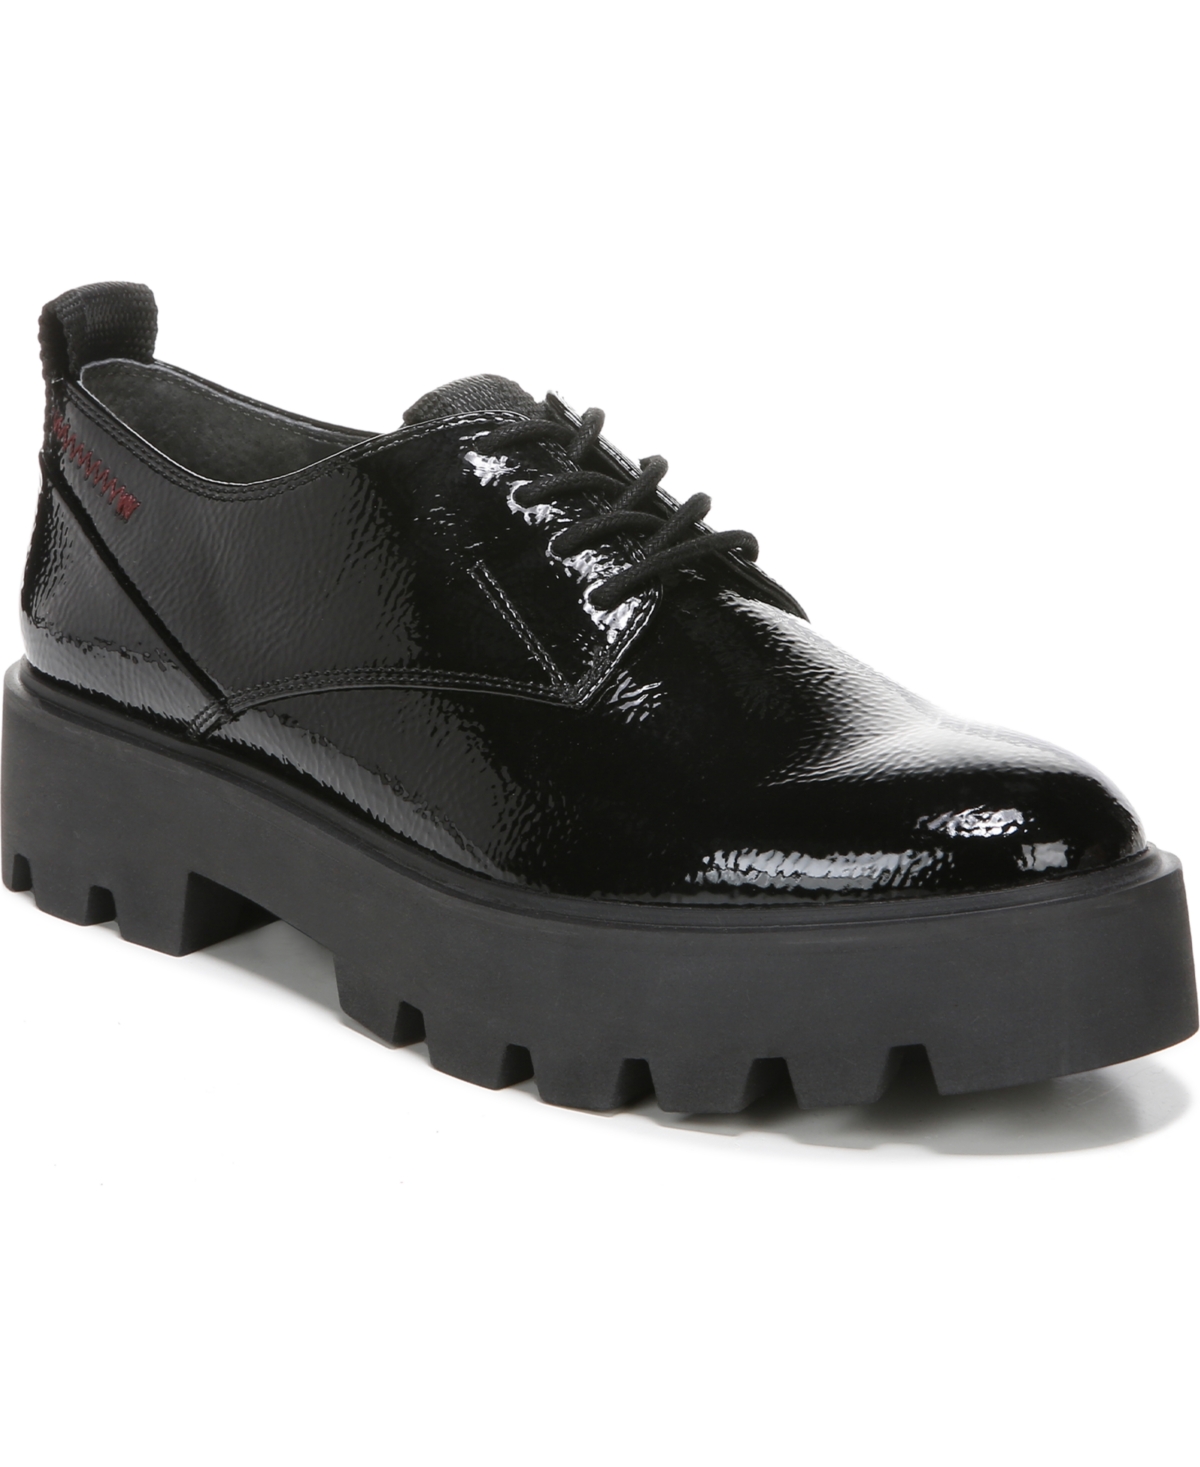 UPC 017138587372 product image for Franco Sarto Balin-Laced Lug Sole Oxfords Women's Shoes | upcitemdb.com